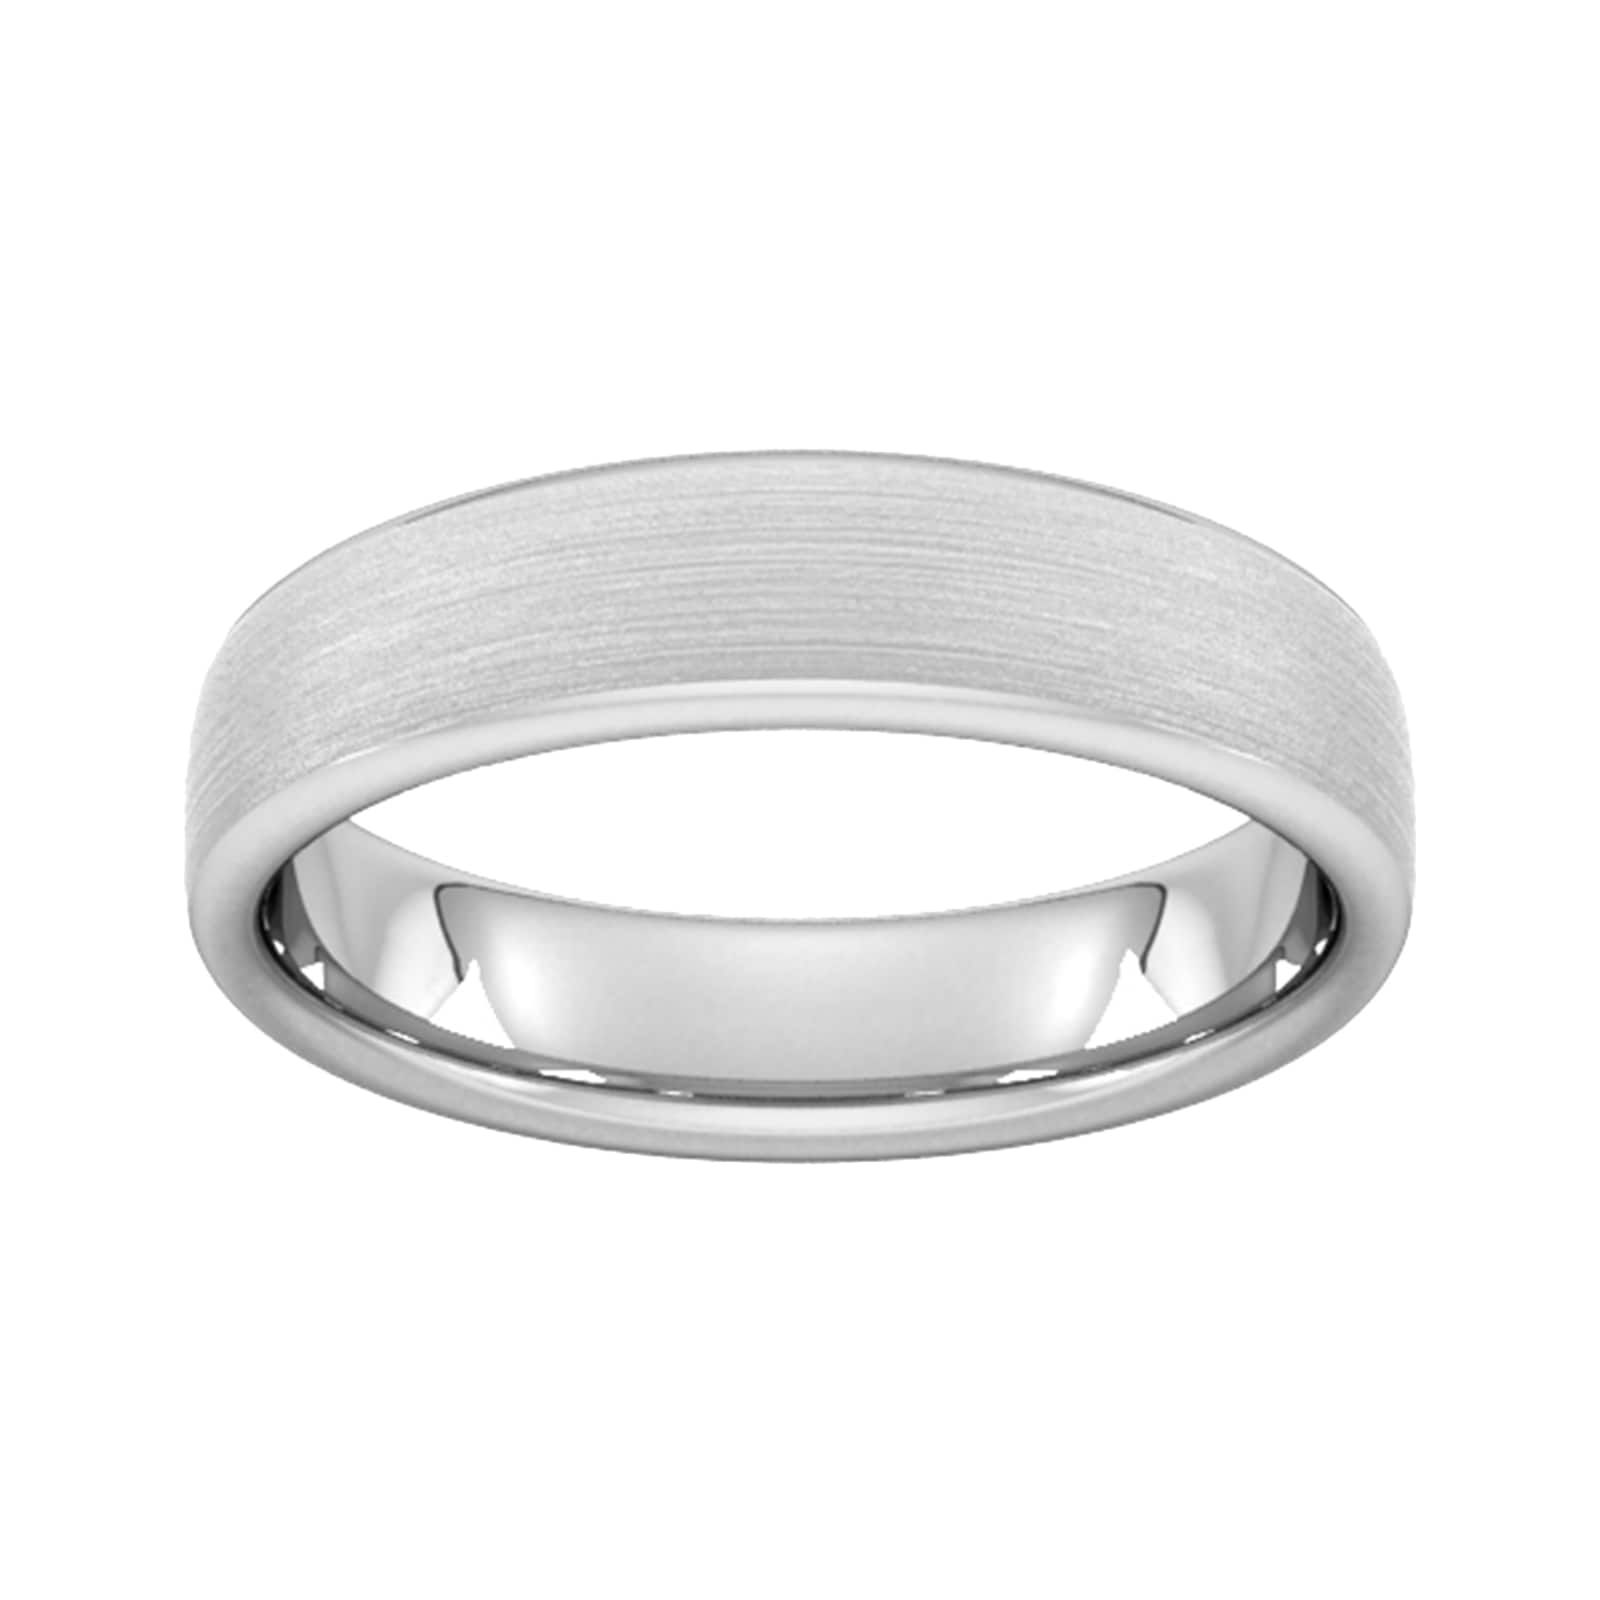 5mm slight court extra heavy matt finished wedding ring in 9 carat white gold - ring size r